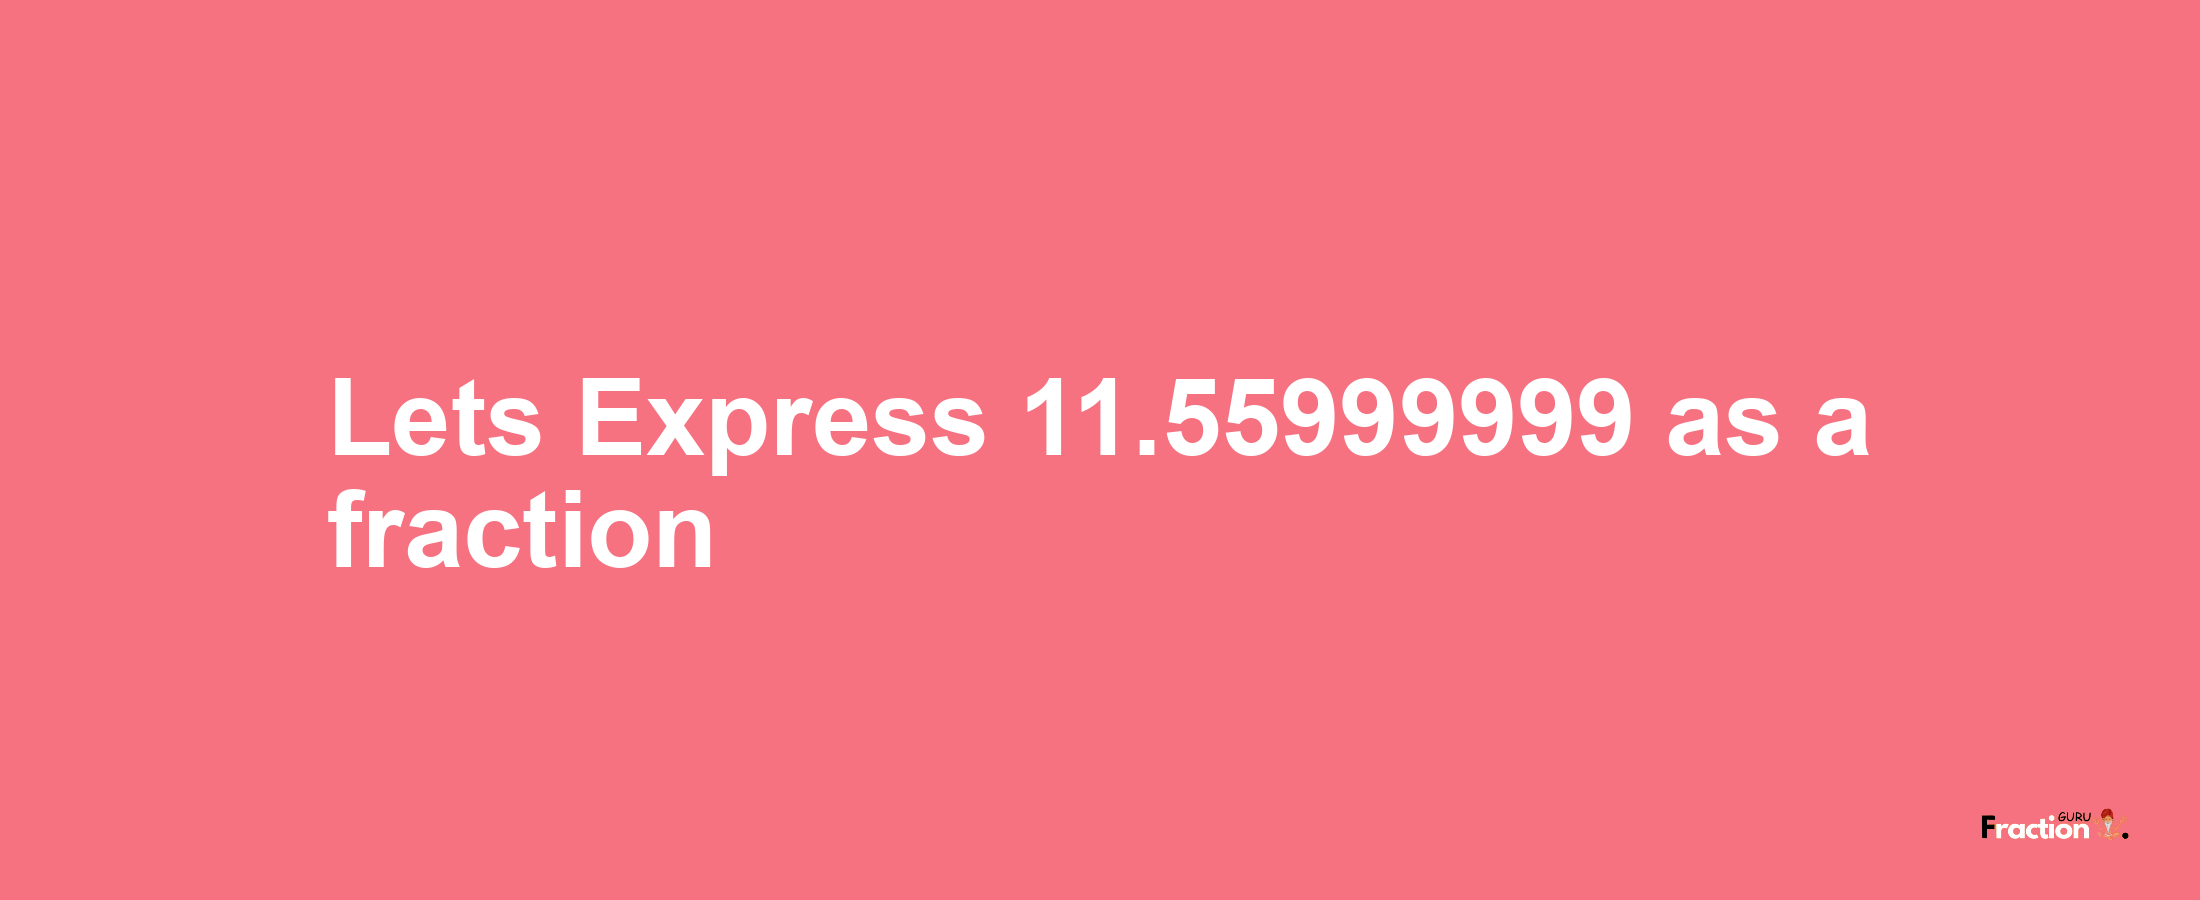 Lets Express 11.55999999 as afraction